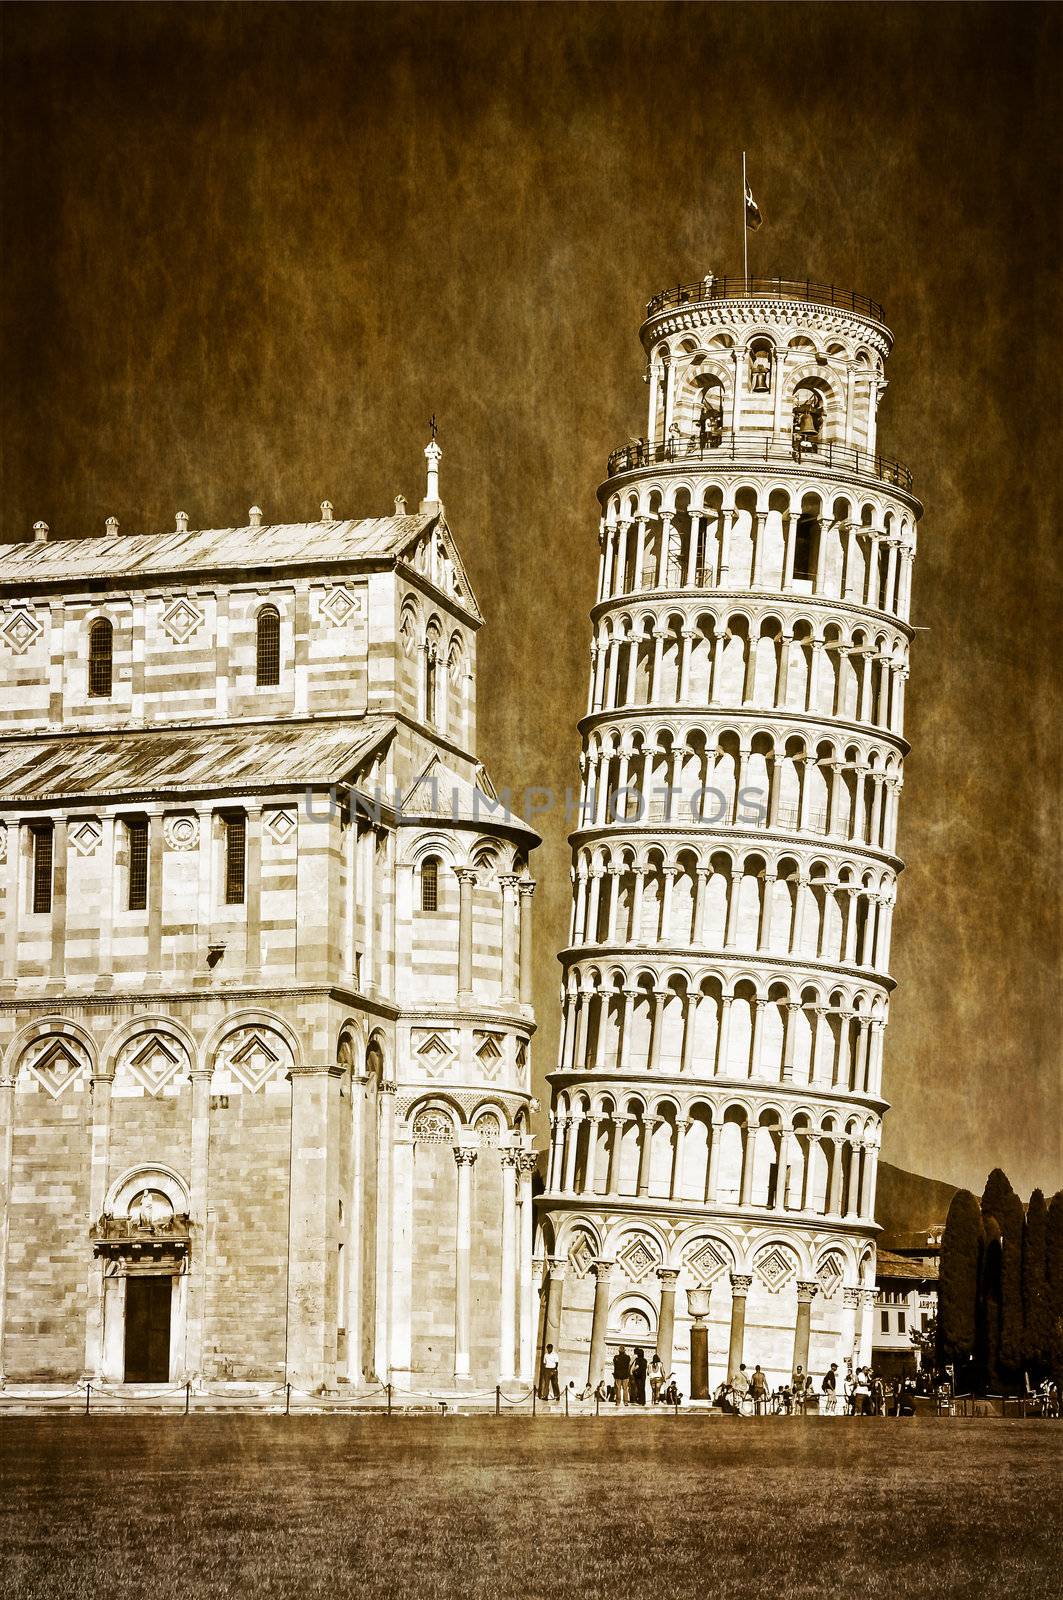 Pisa leaning tower vintage retro view by martinm303